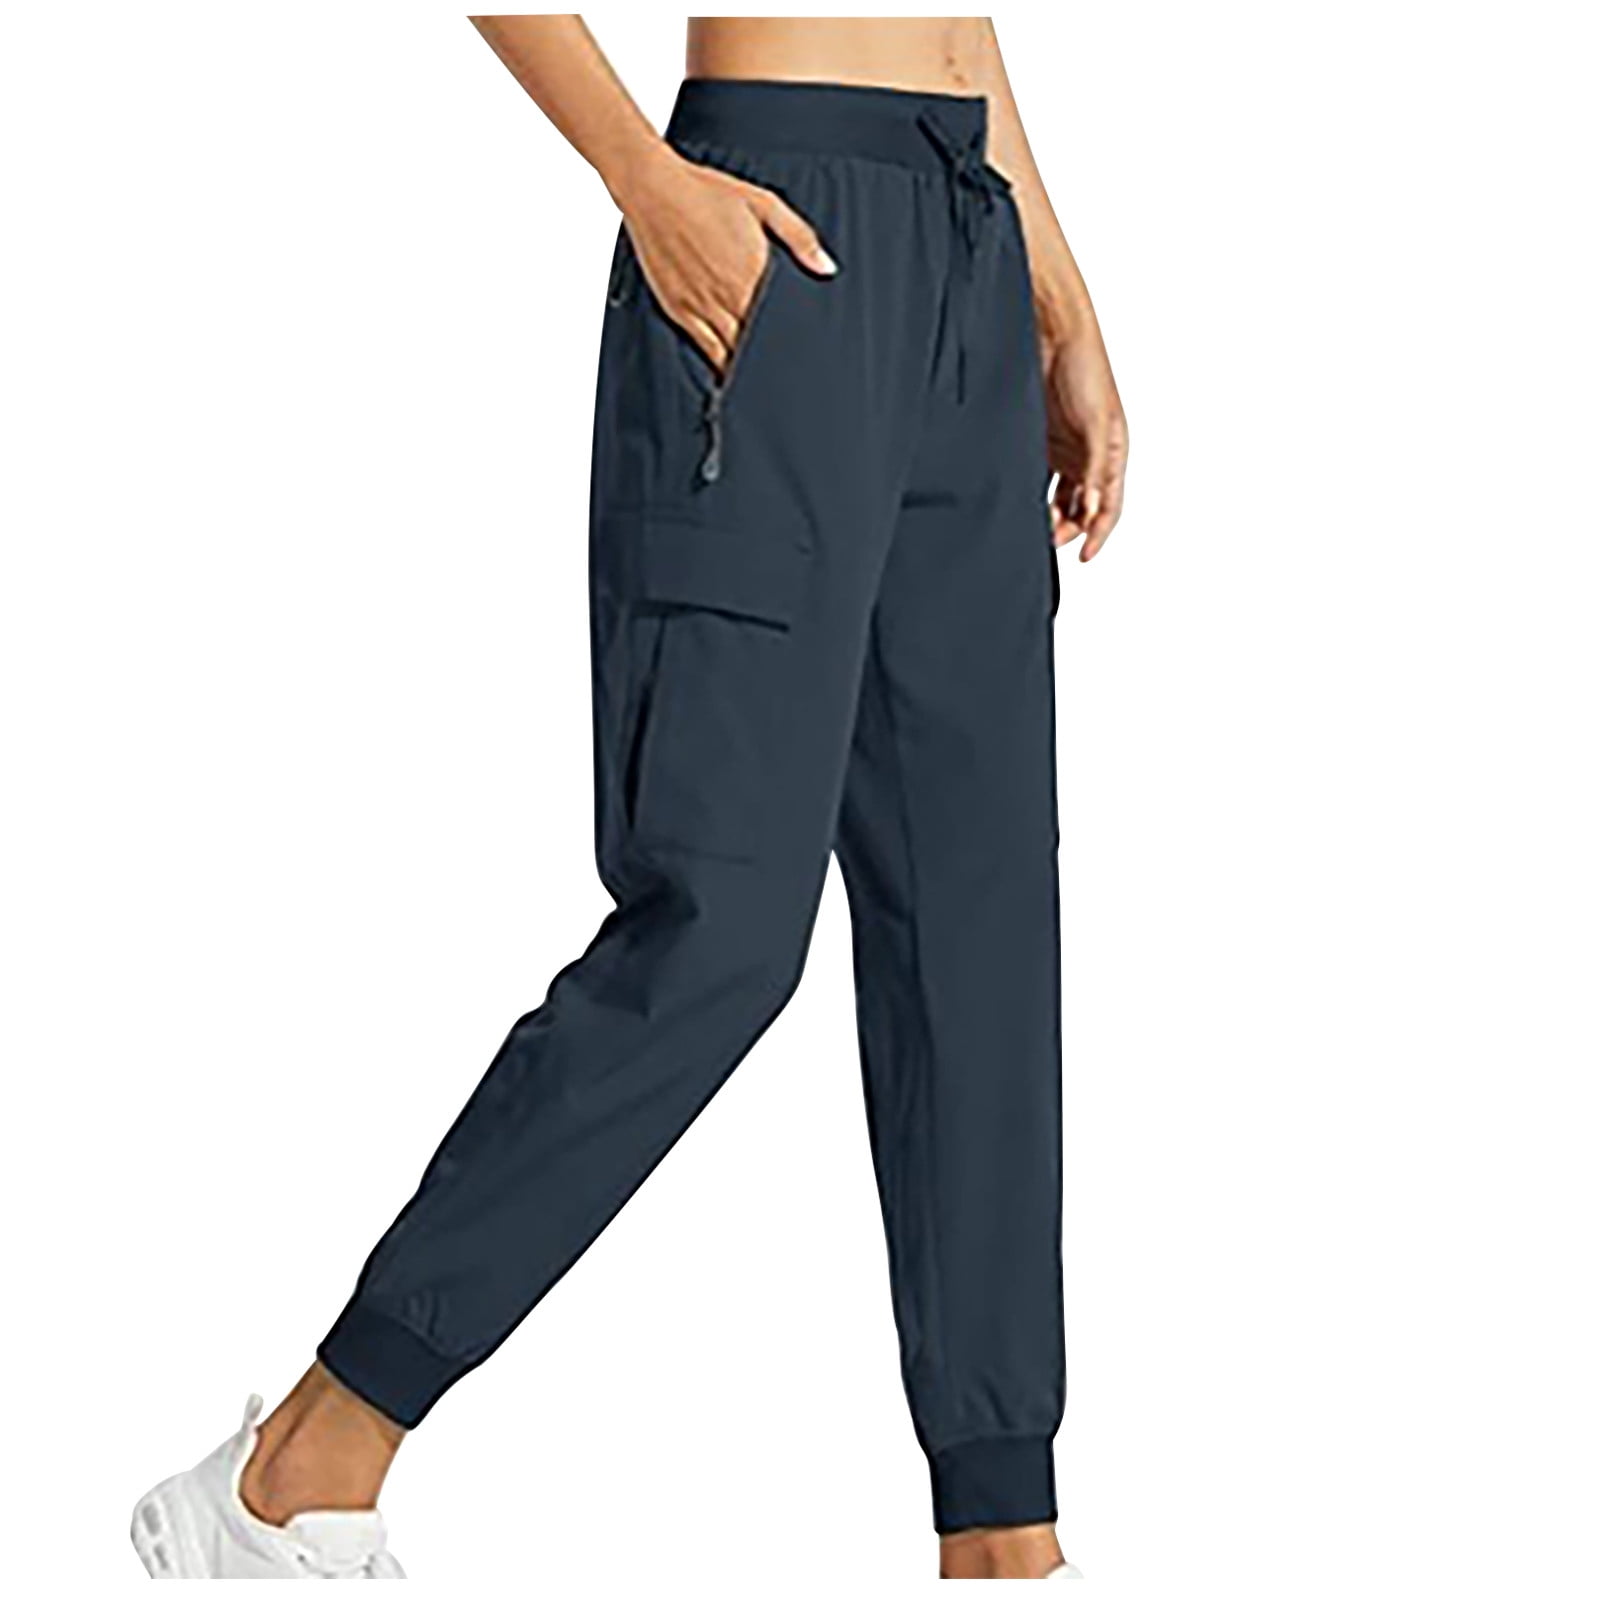 Joggers For Women Hiking Pants Lightweight Cargo Joggers Quick Dry Golf  Travel Track Pants With Zipper Pockets Dark Blue X-Large 